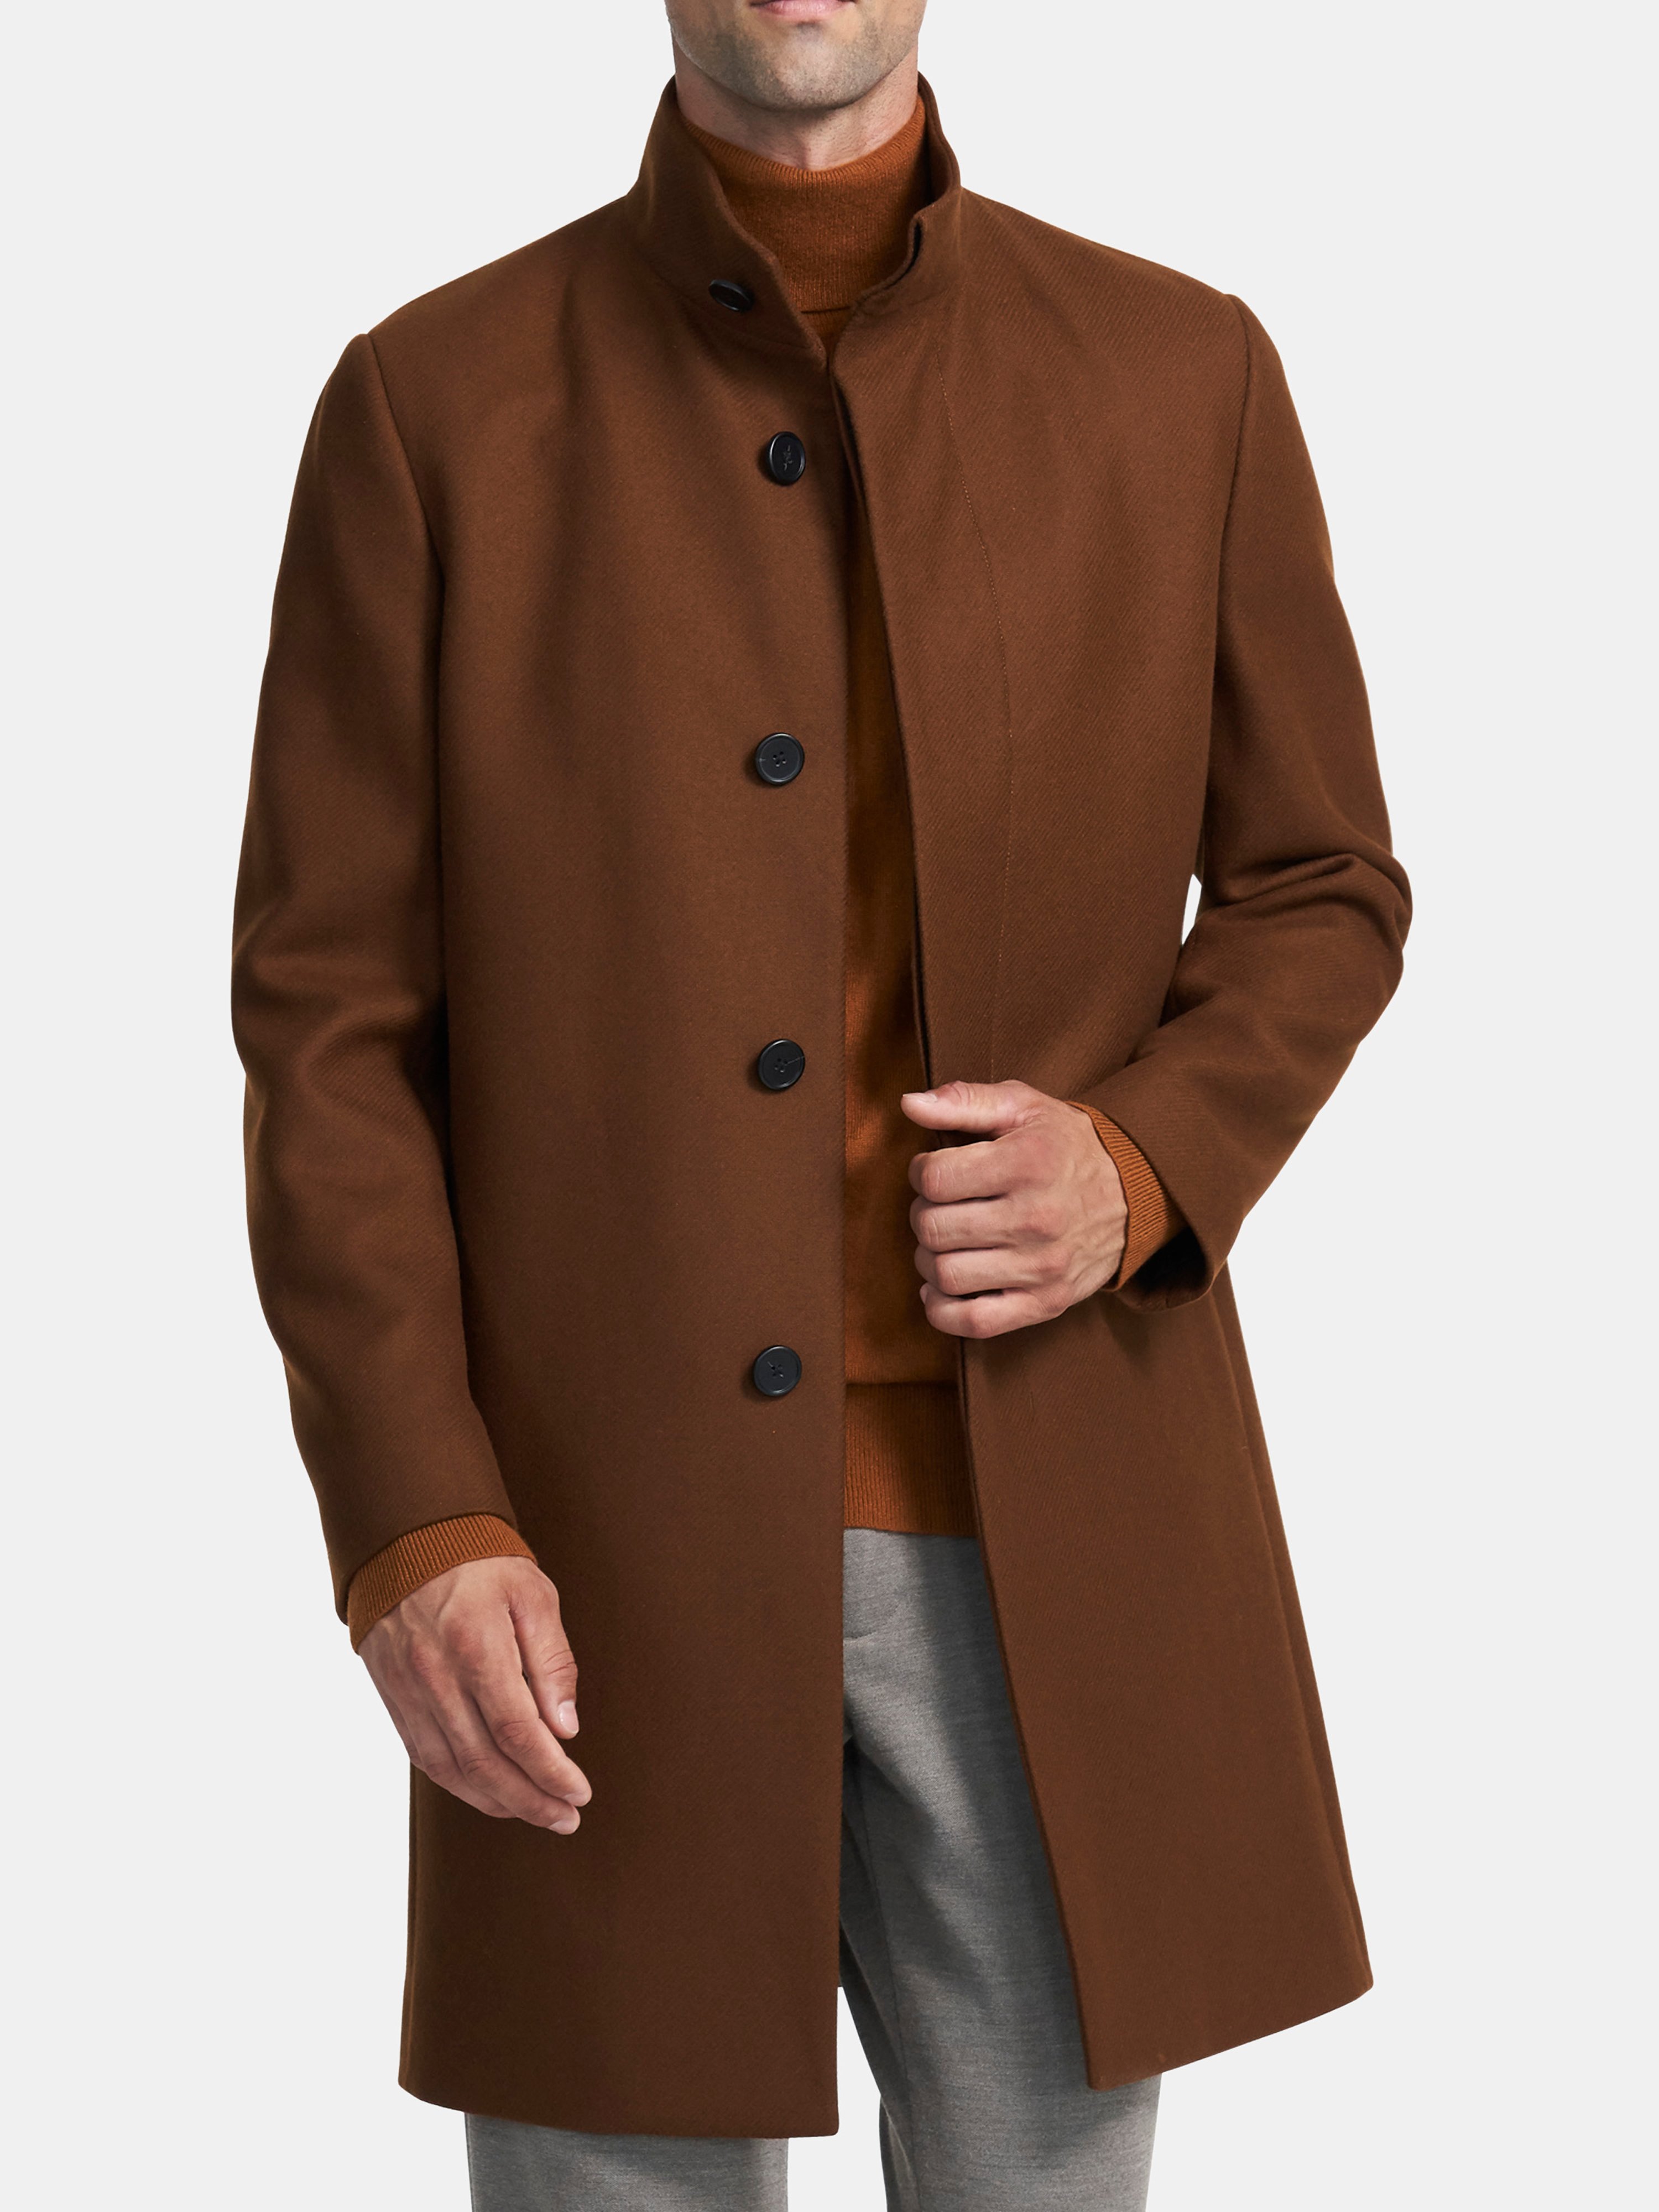 THEORY THEORY BELVIN TRACEABLE THIGH-LENGTH COAT